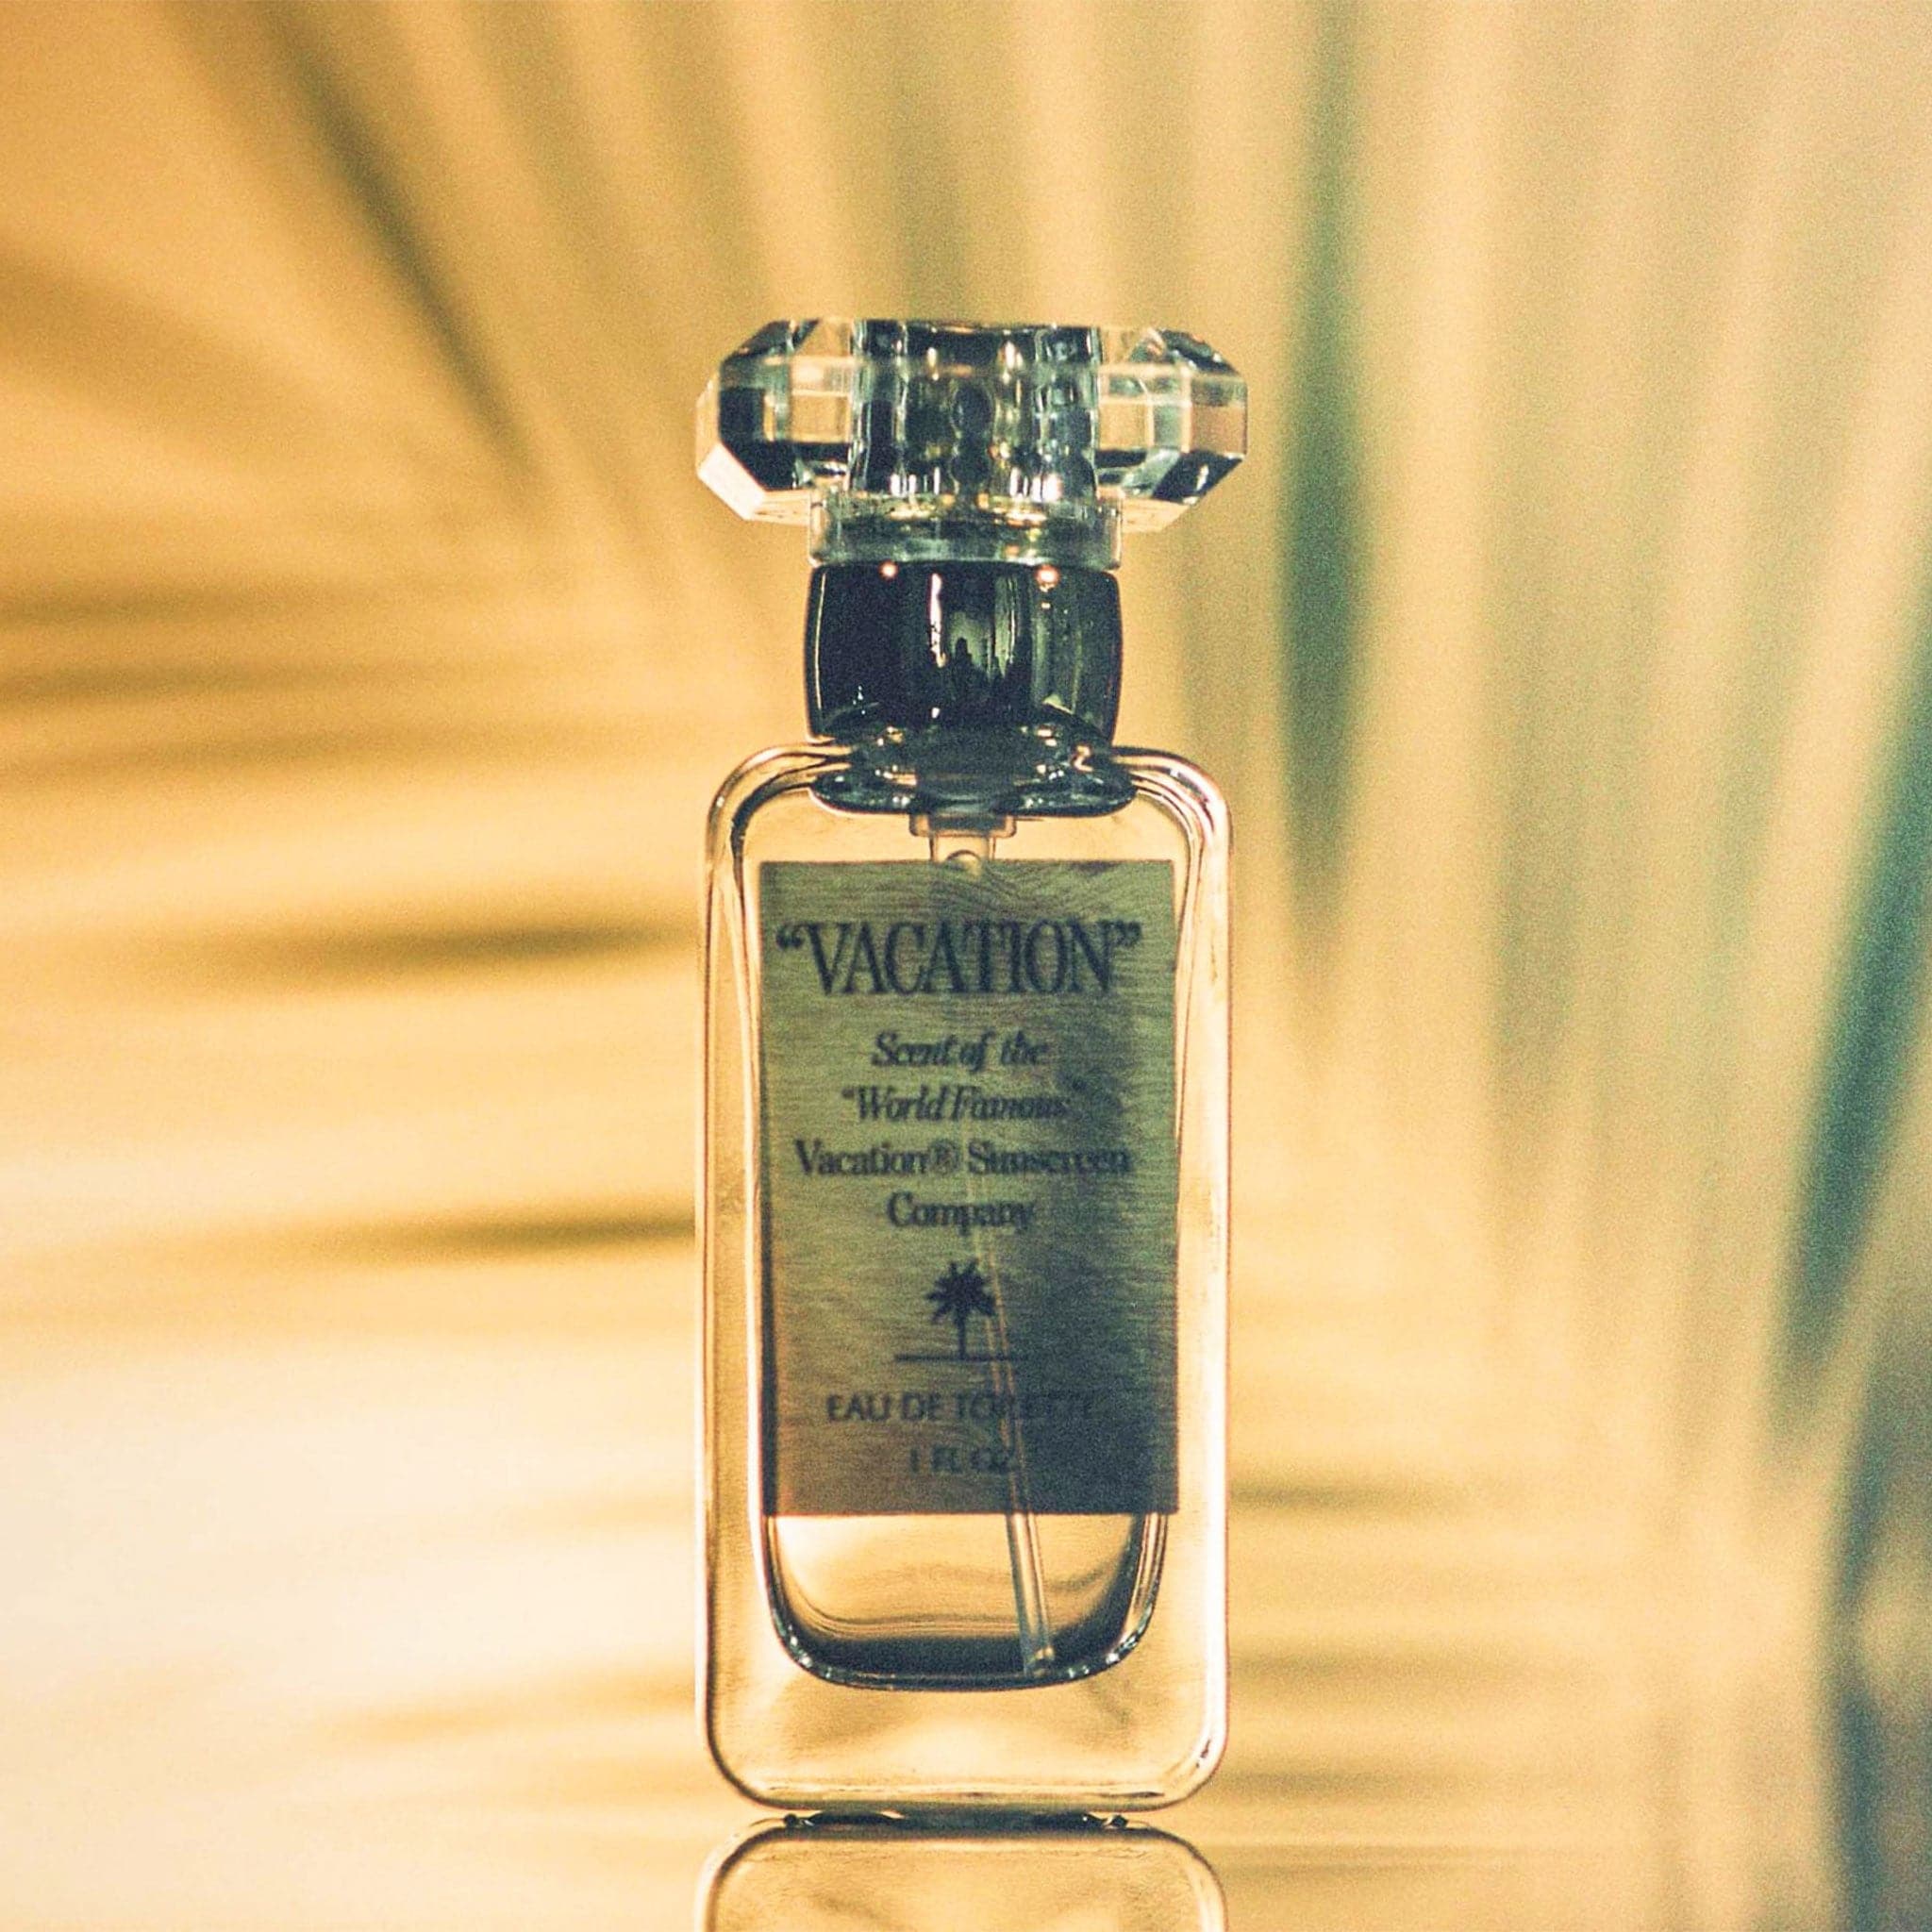 Glass perfume bottle that reads &#39;Vacation, Scent of World Famous Vacation Sunscreen Company&#39; across the front label. The bottle is topped with a glass knob lid. The bottle is placed against a shadow palm background. 